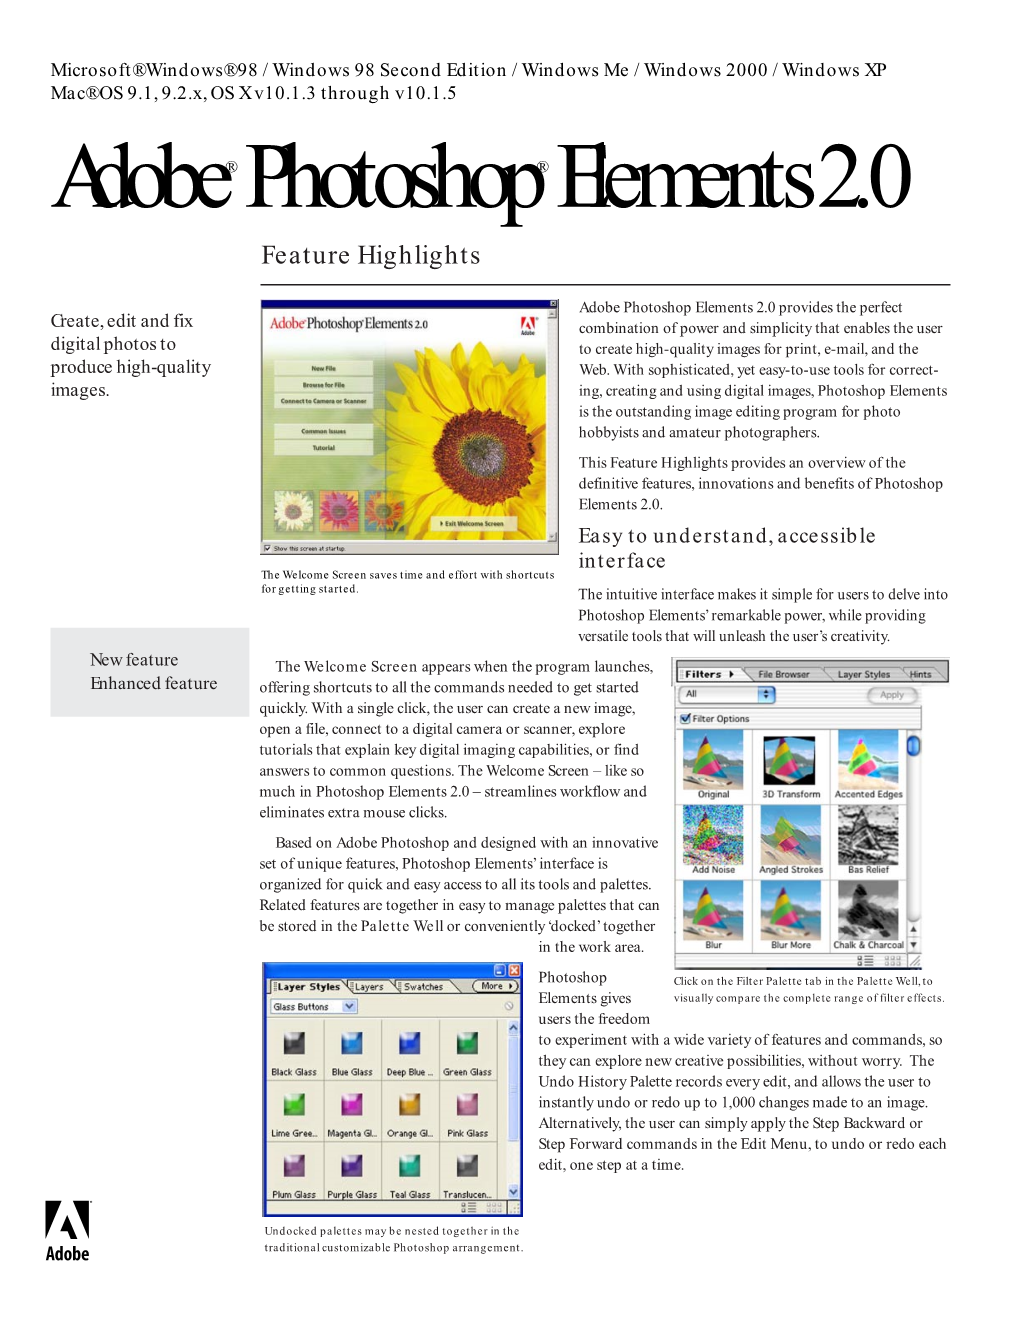 Adobe® Photoshop® Elements 2.0 Feature Highlights